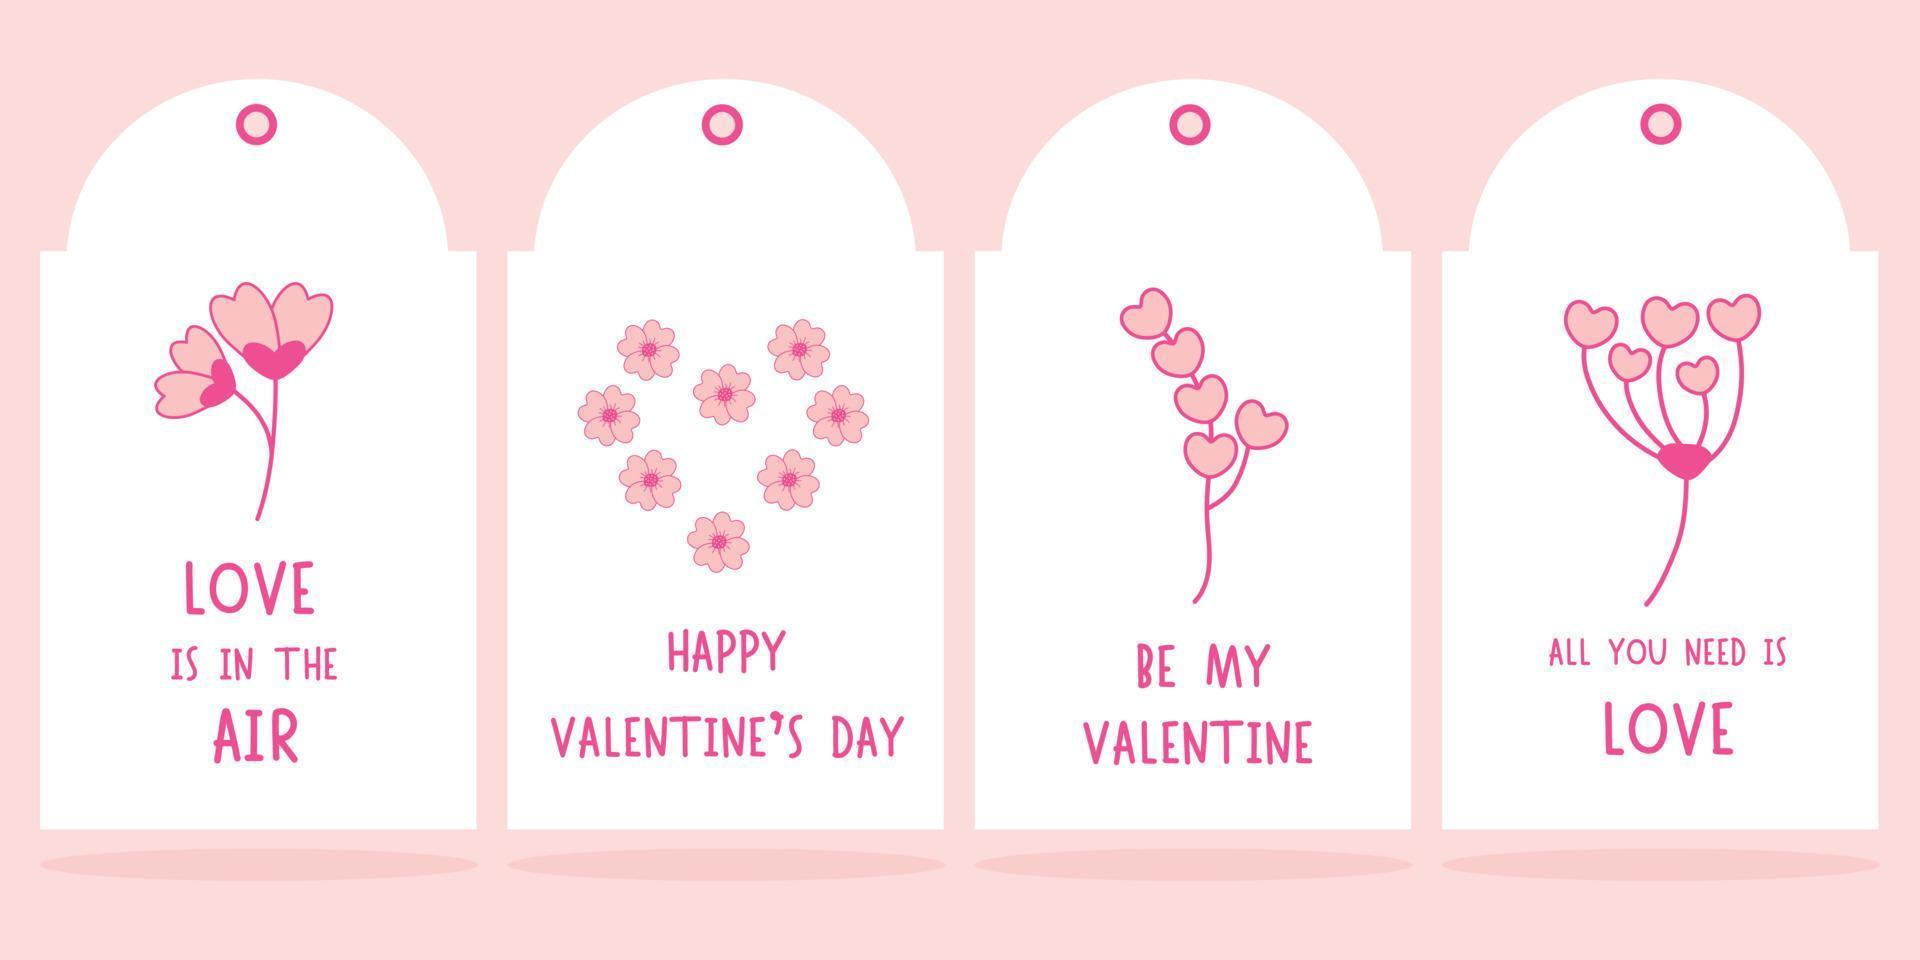 Set of Valentine's day tags for gift boxes, labels, sale shopping labels, banners and more vector